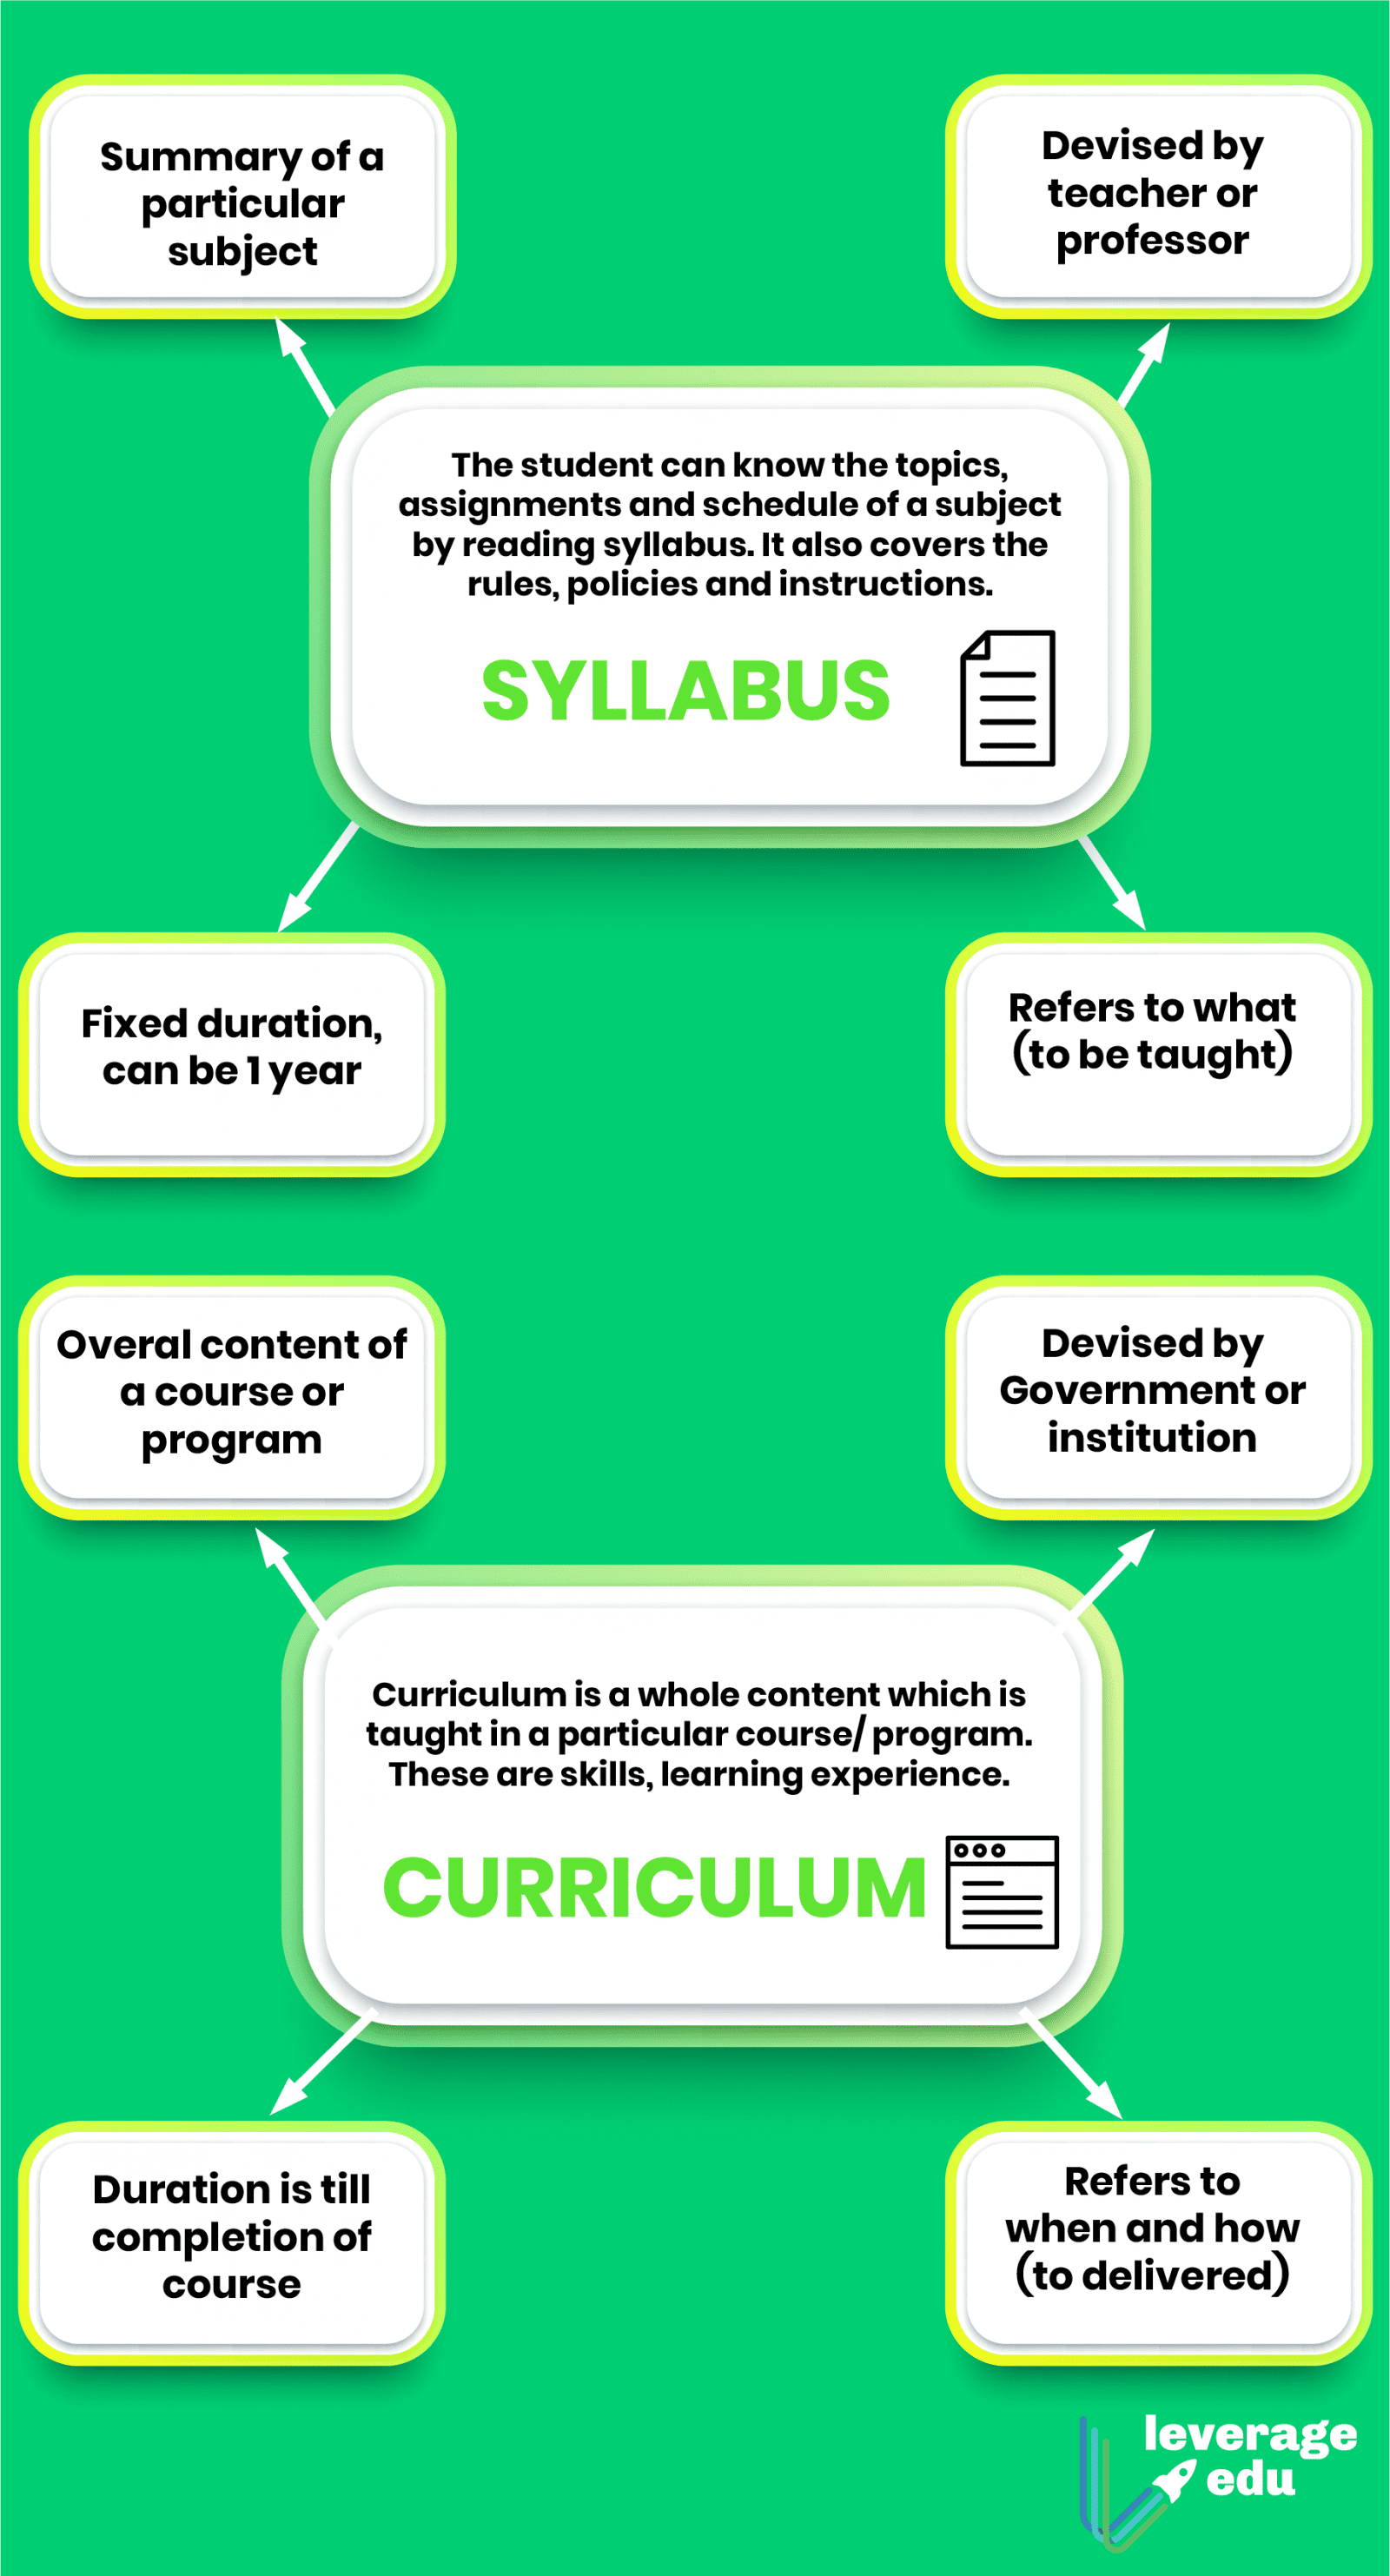 syllabus-vs-curriculum-differences-meaning-relationship-leverage-edu